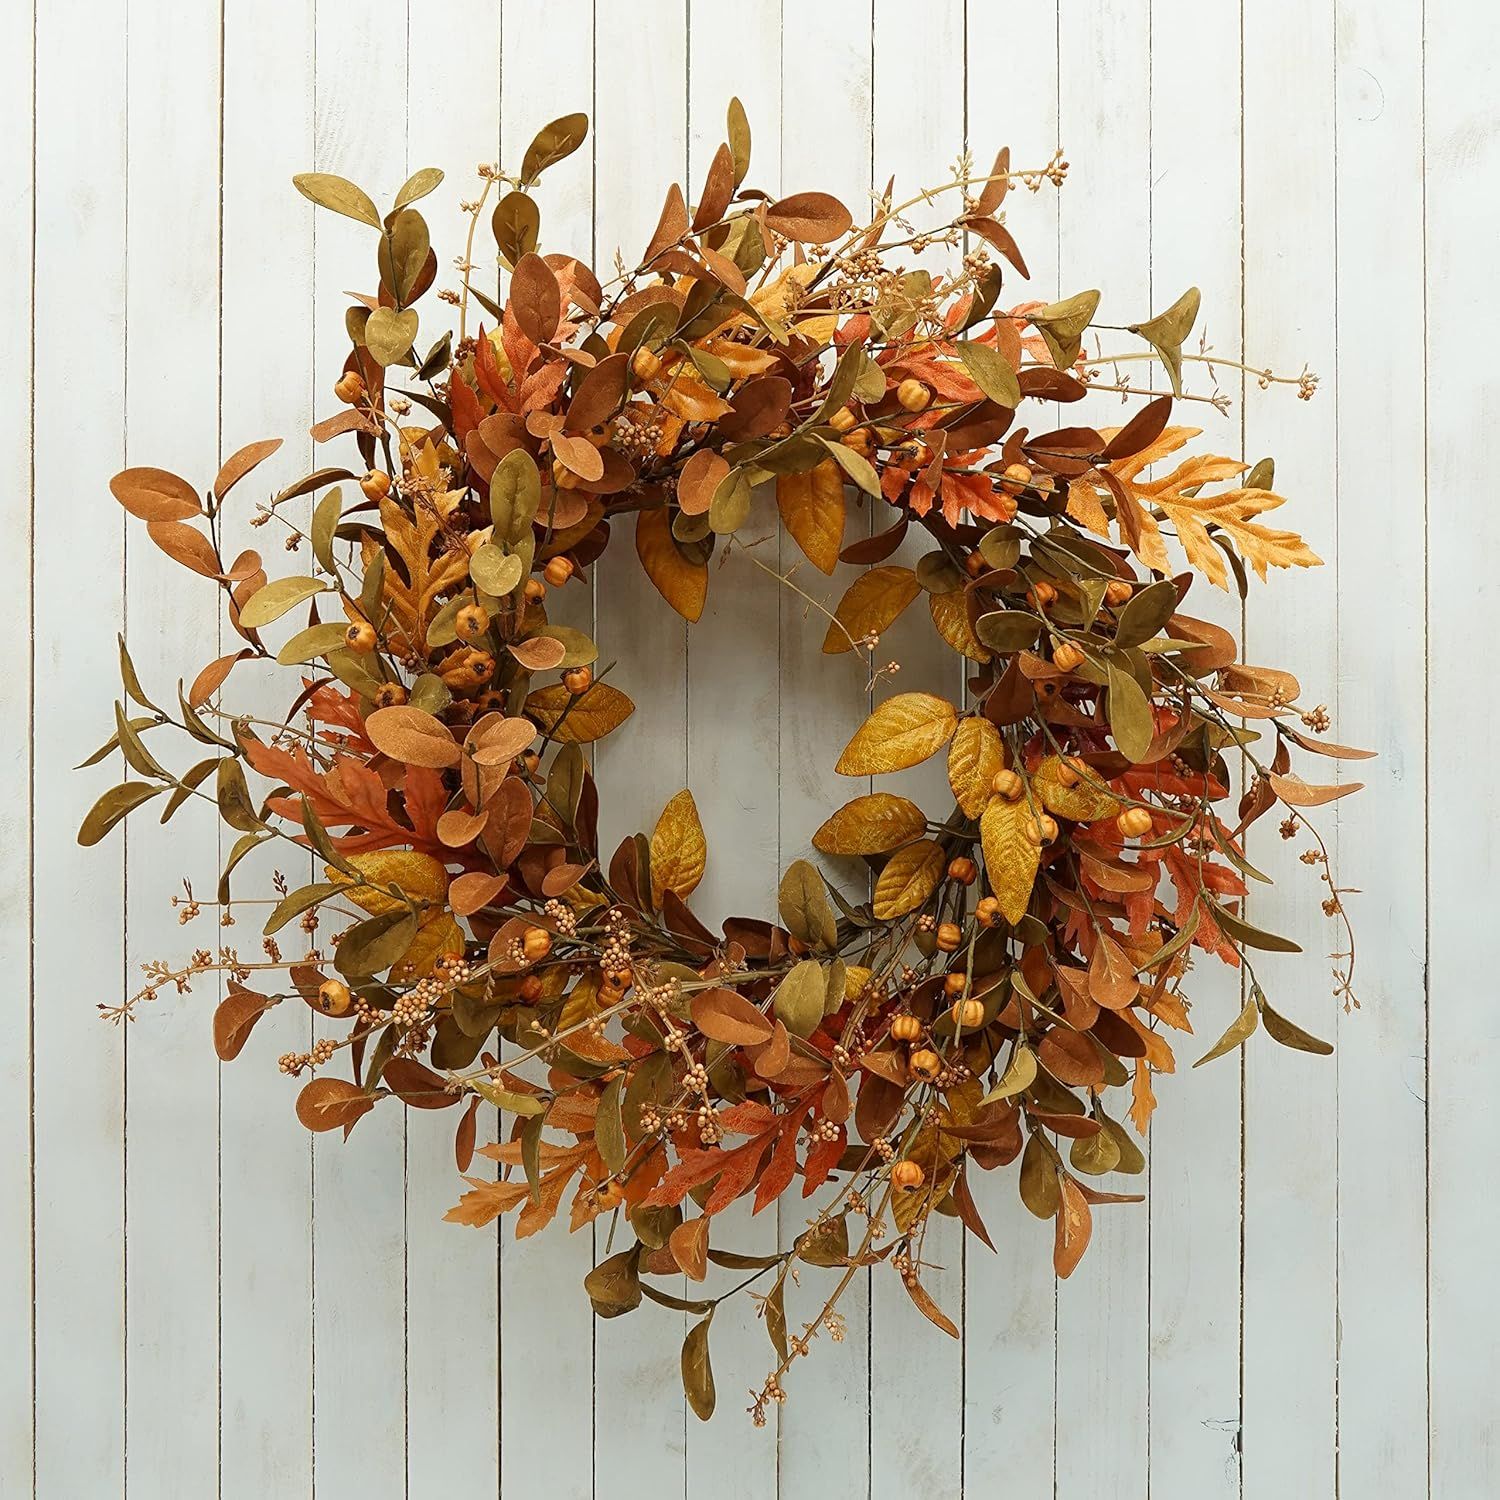 AMF0RESJ Artificial Fall Wreath for Front Door Autumn Wreath with Bright Oak Leaves,Small Pumpkin... | Amazon (US)